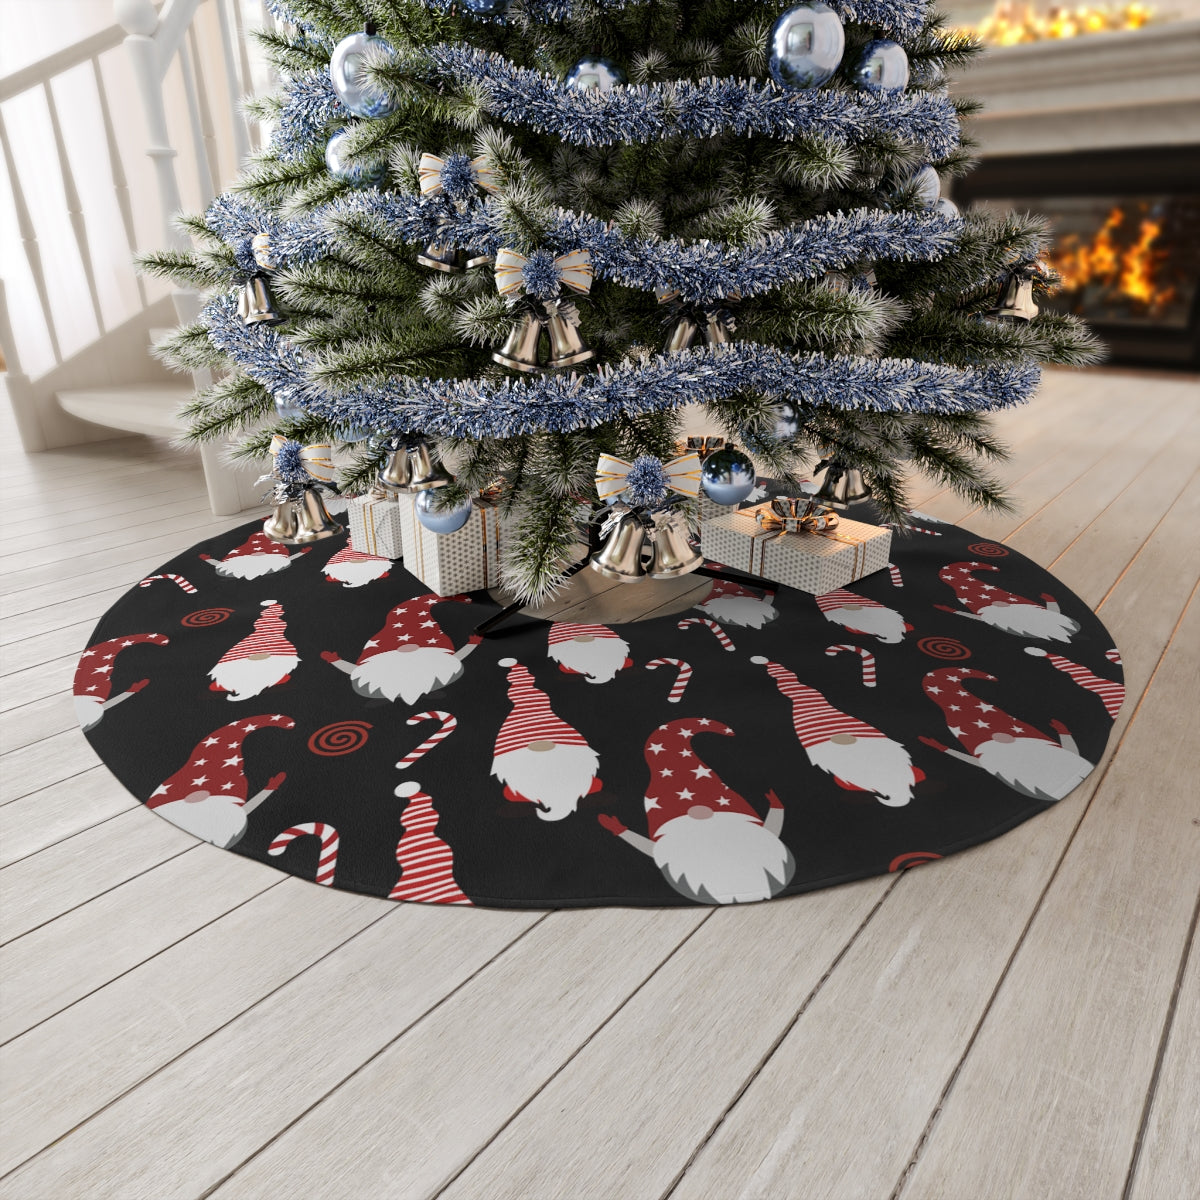 Christmas gnome tree skirt in black and red